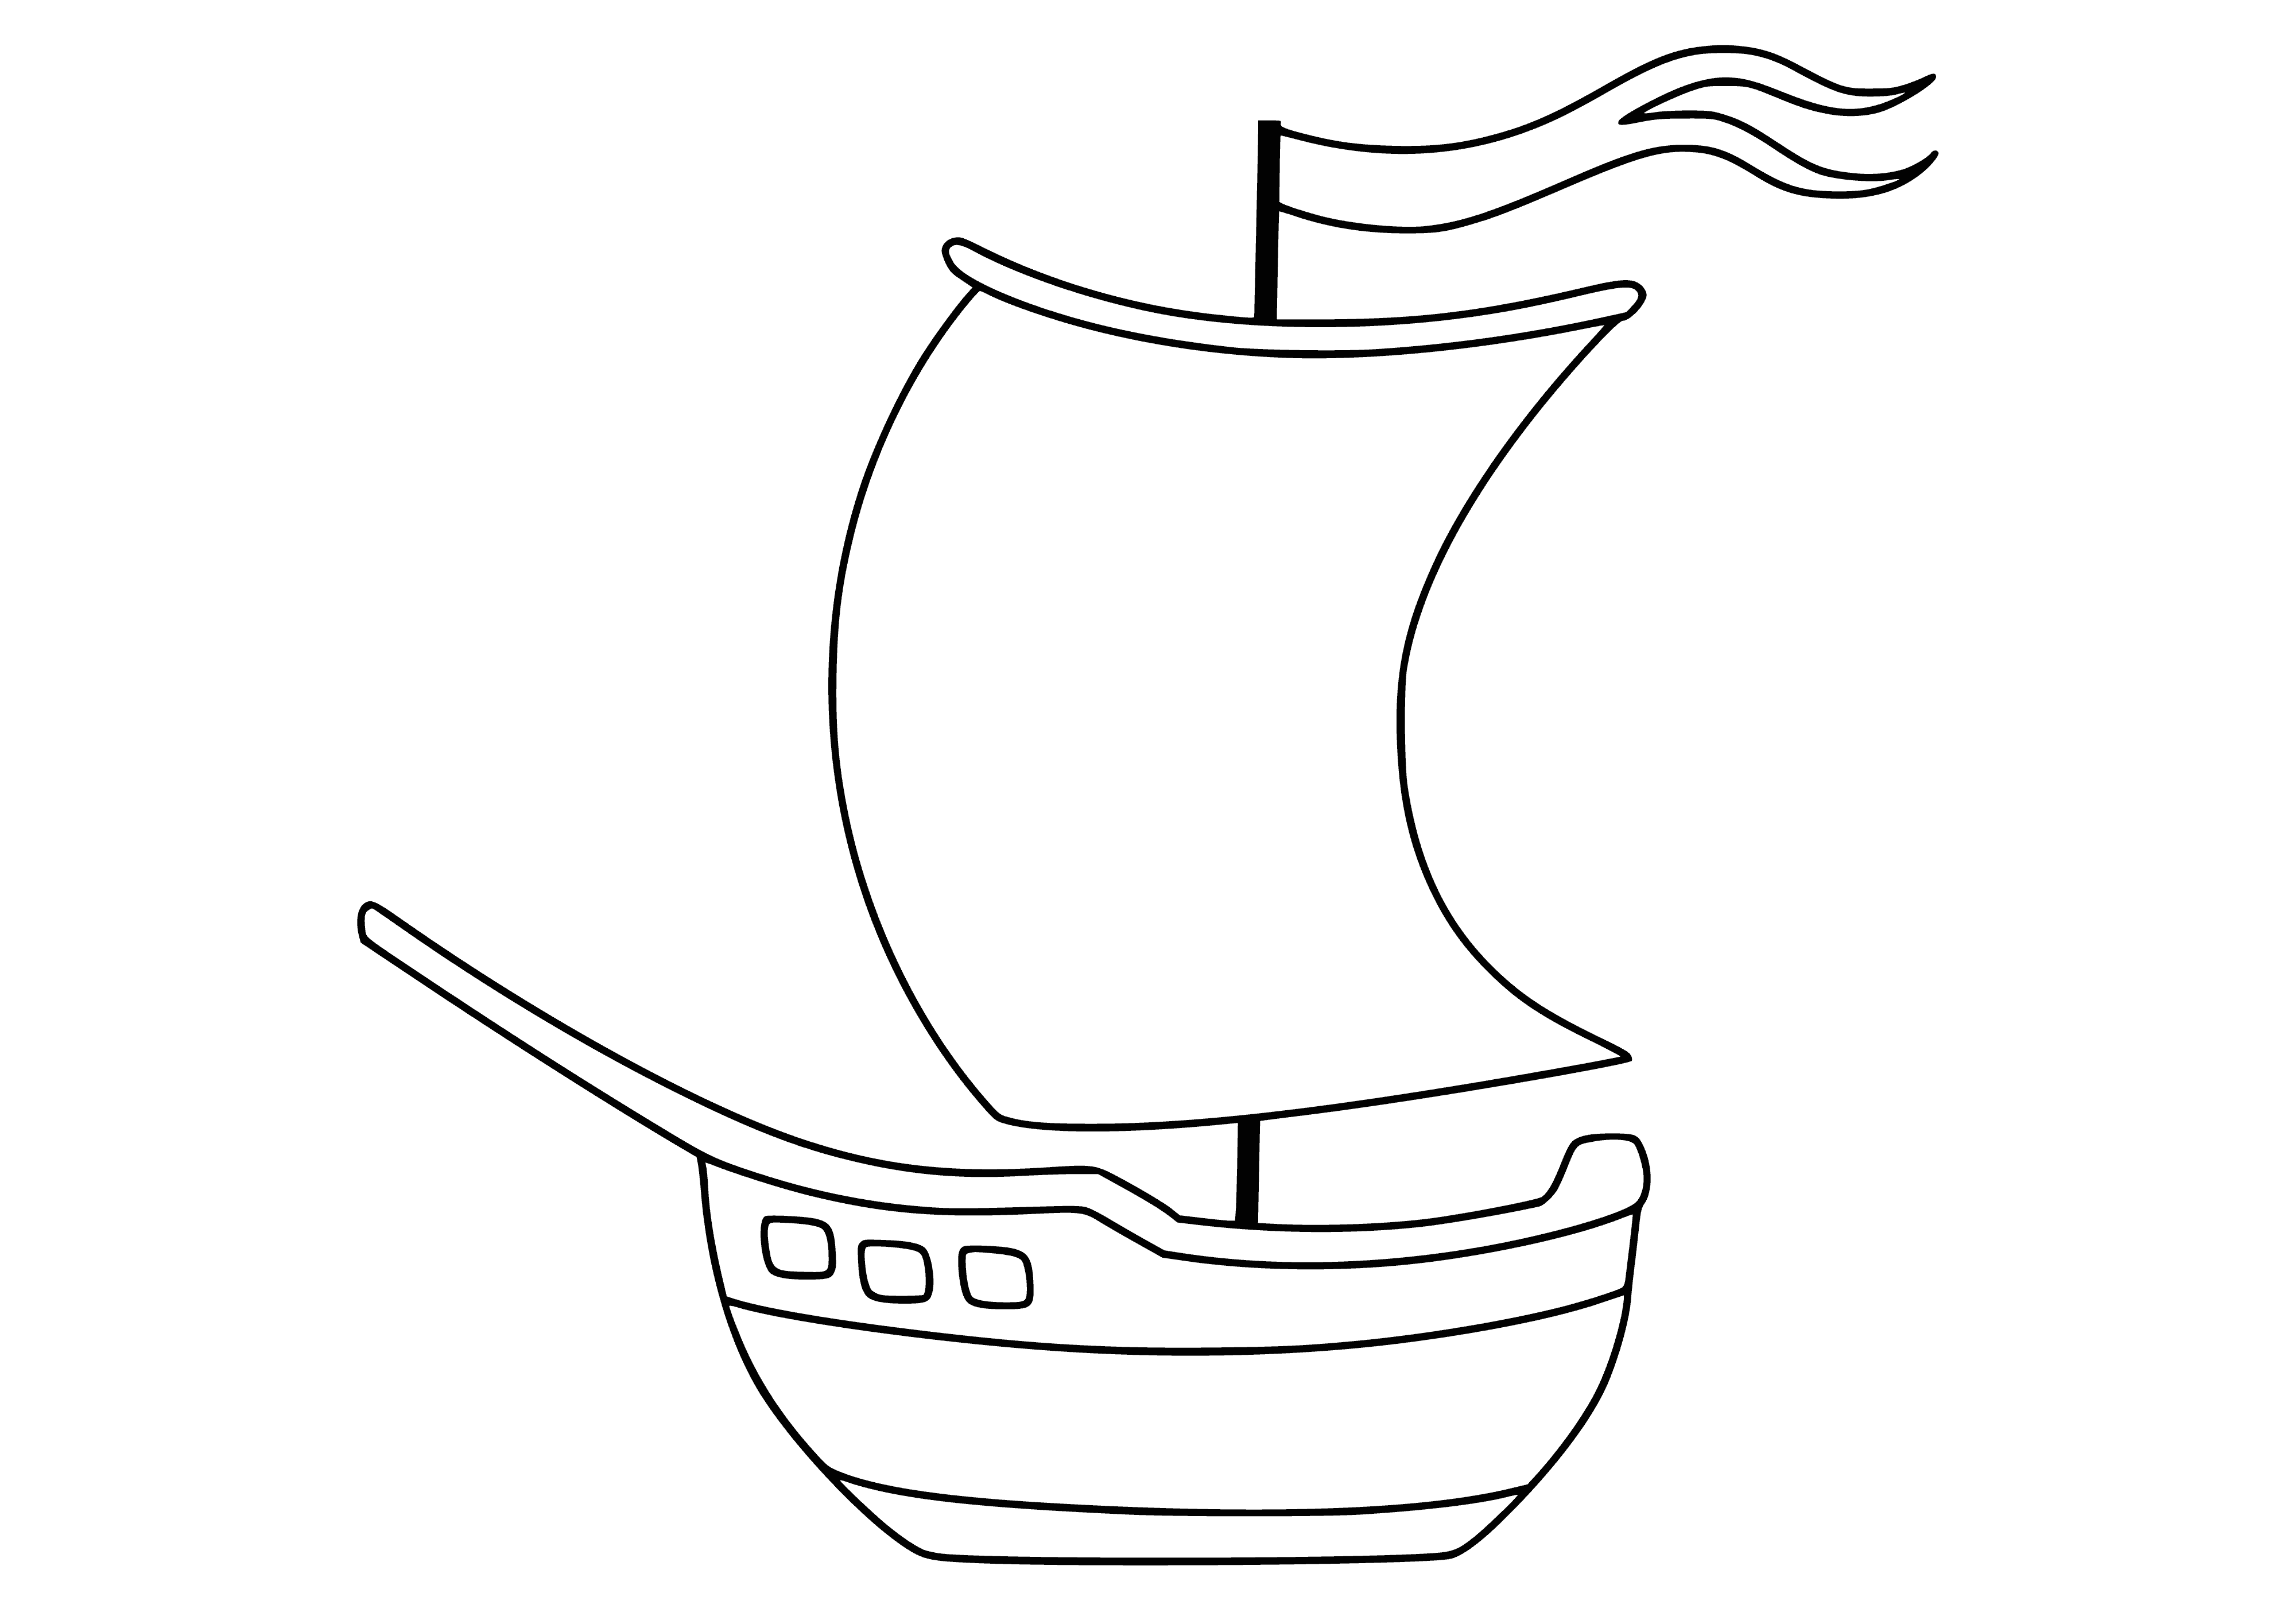 Ship coloring page